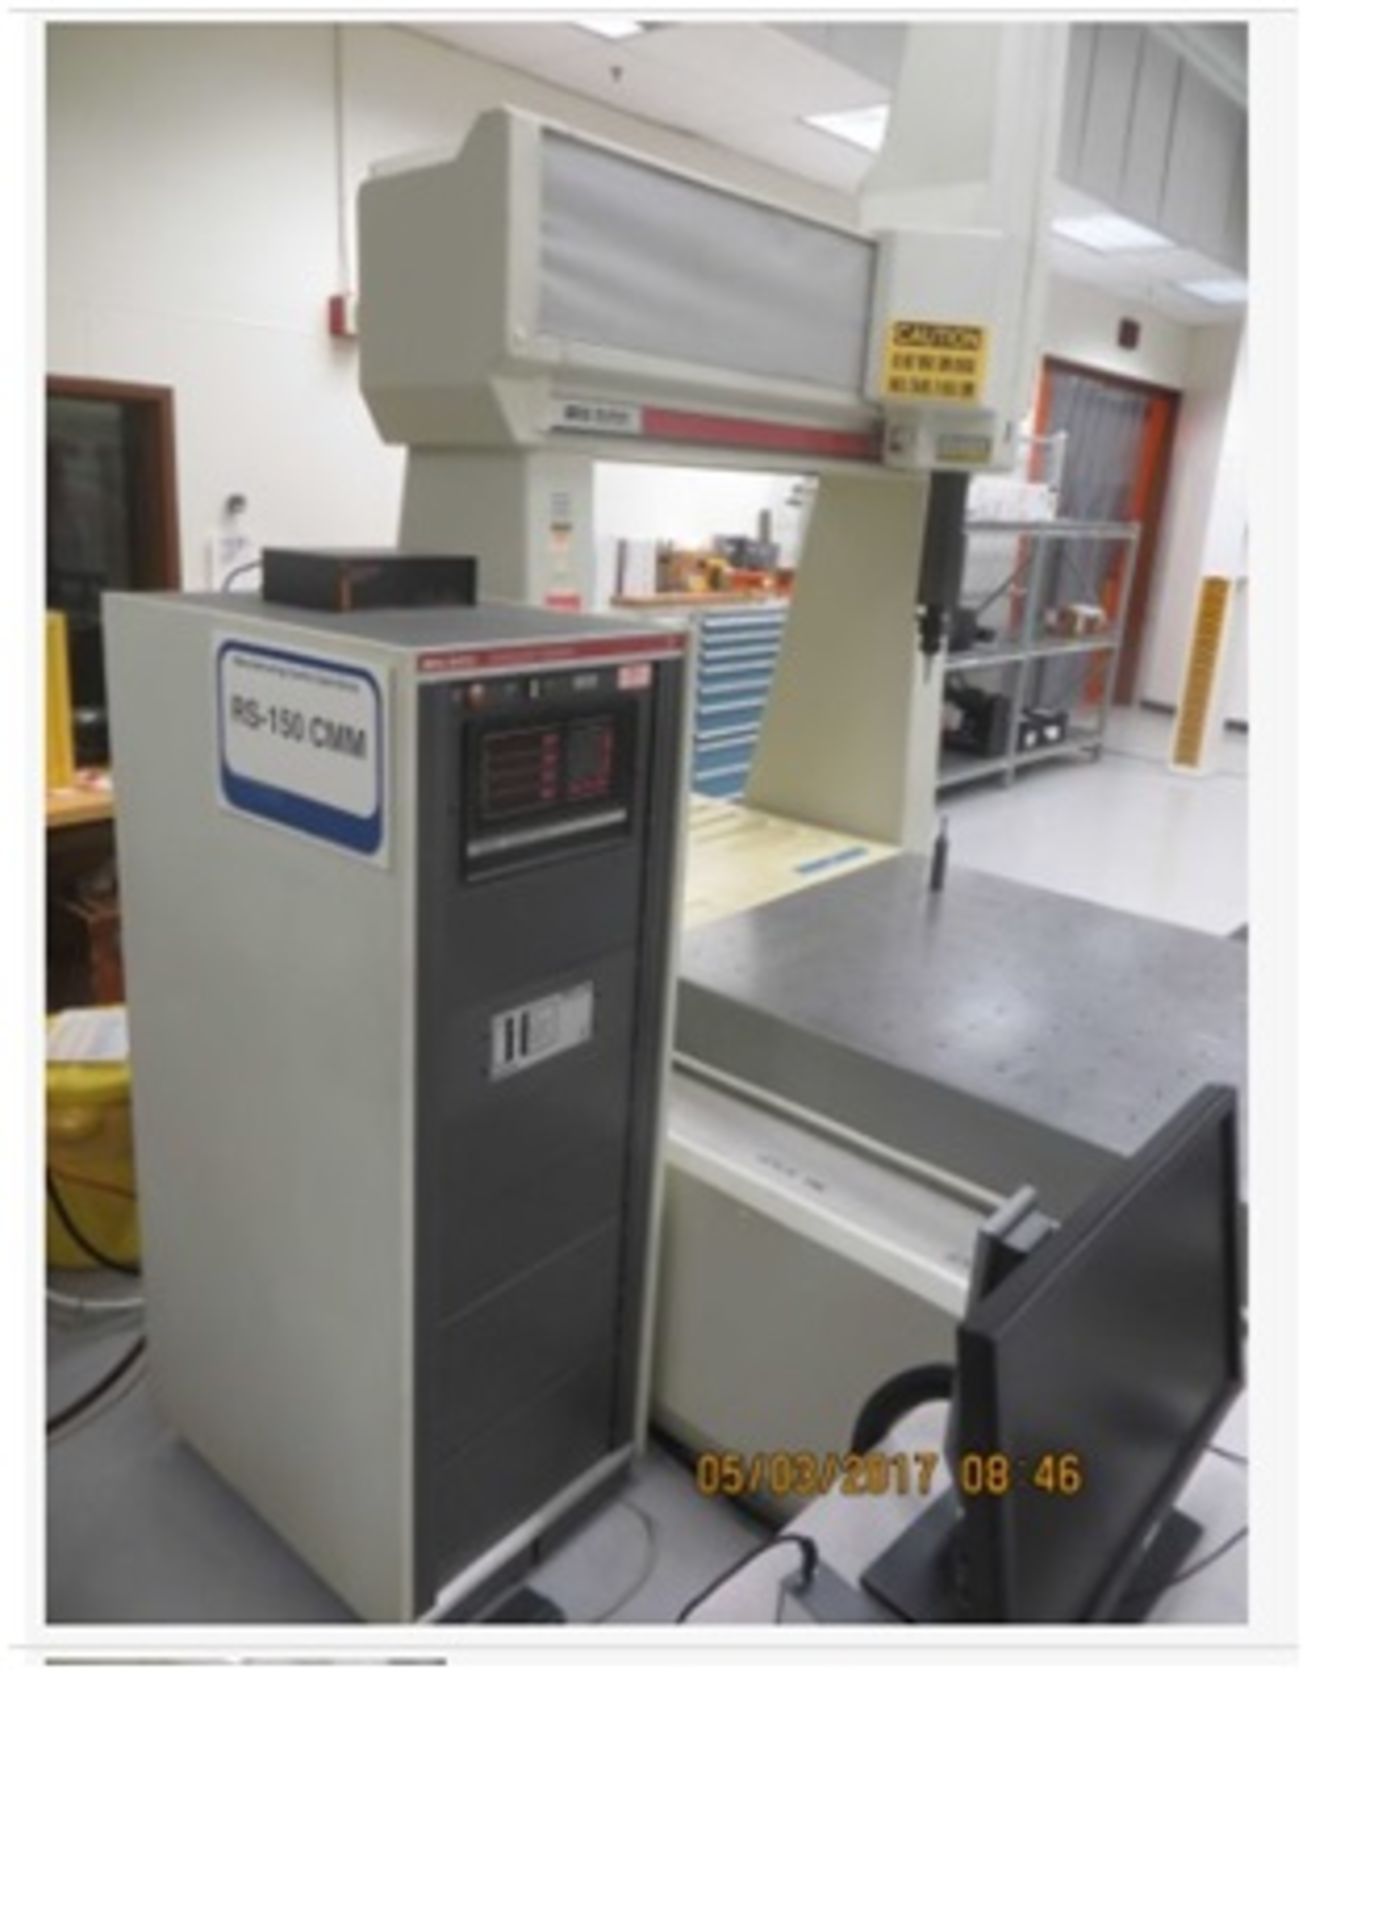 Sheffield Measurement Division RS-150 Coordinate Measuring Machine, Yr 1987. SN# A-0075. Asset#